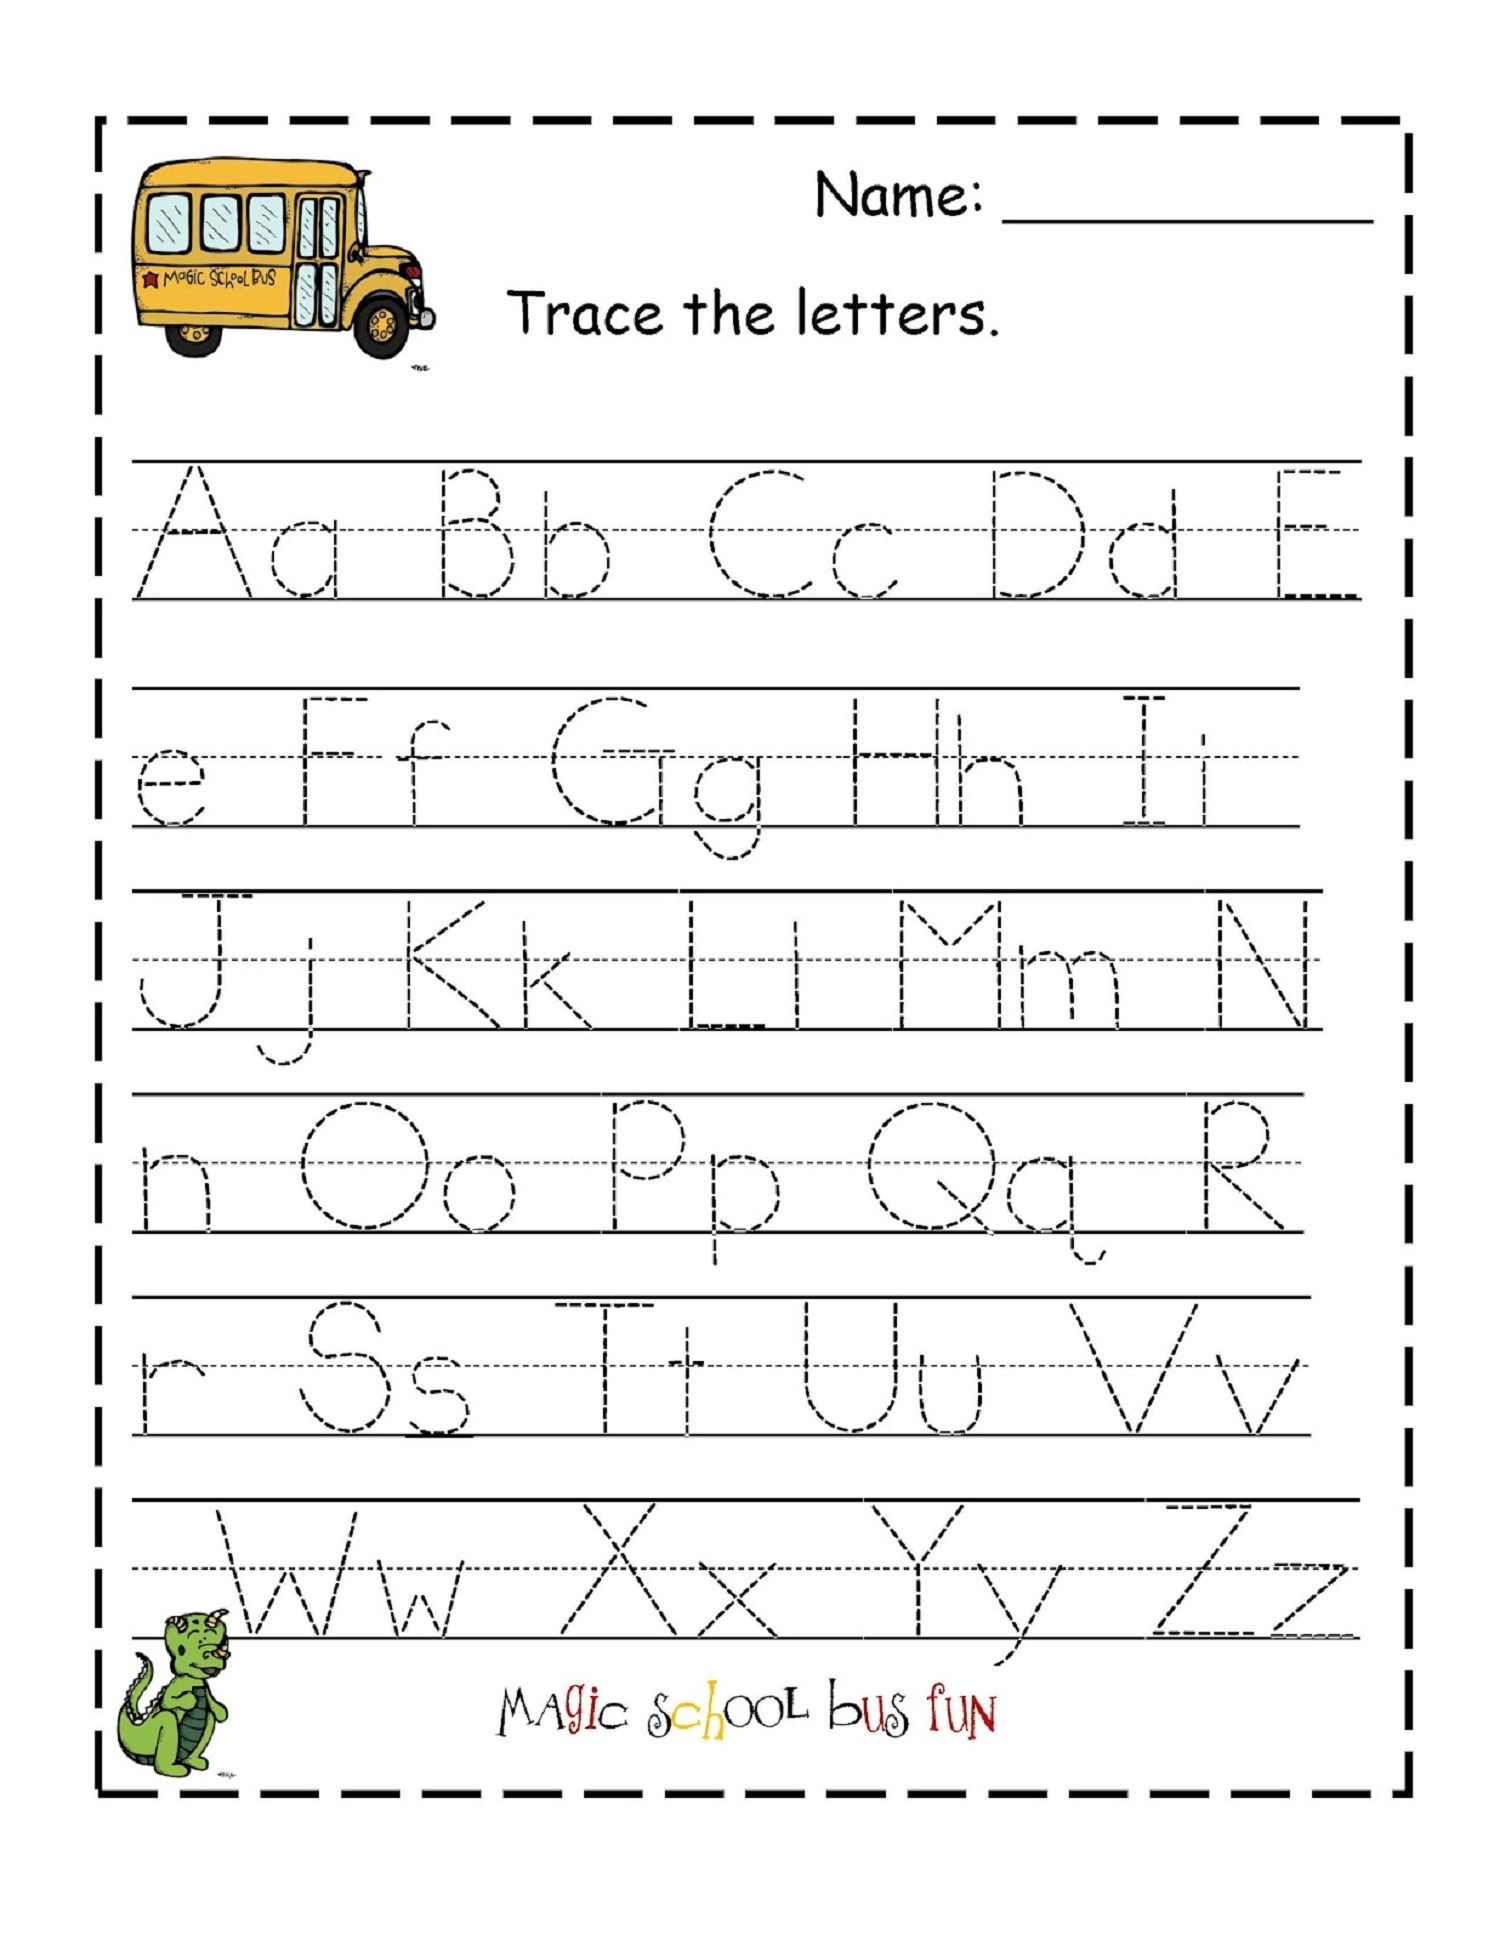 Traceable Alphabet For Learning Exercise | Letter Tracing within Free Tracing Alphabet Letters